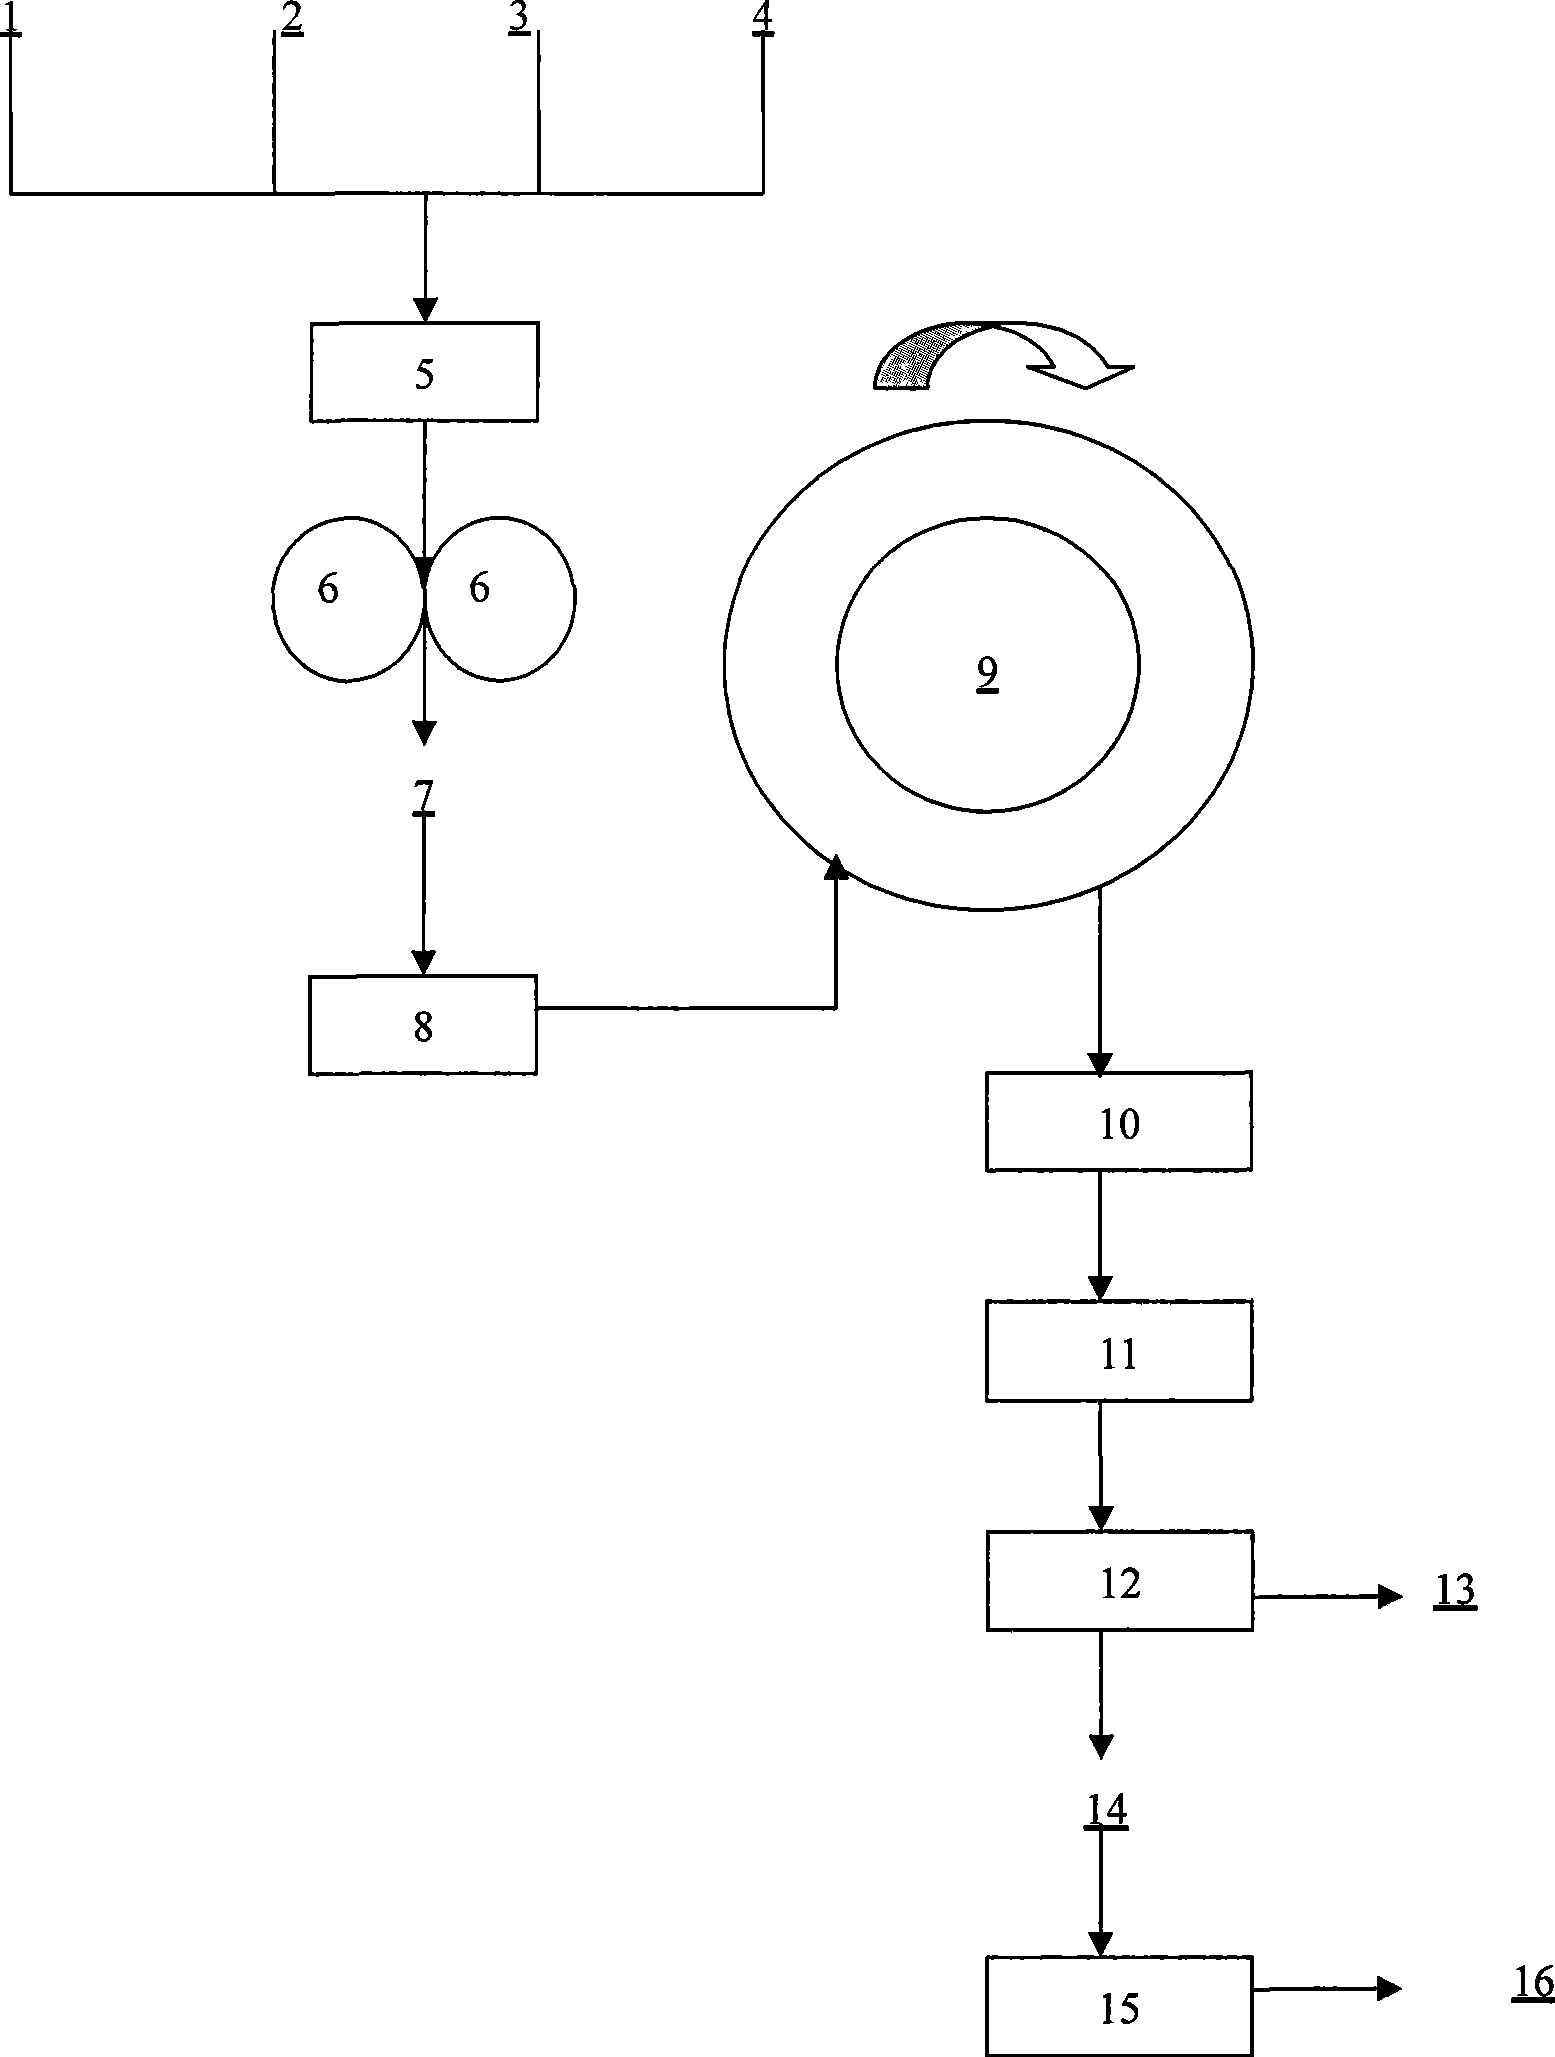 Method for smelting nickel-iron alloy from laterite nickel oxide ore